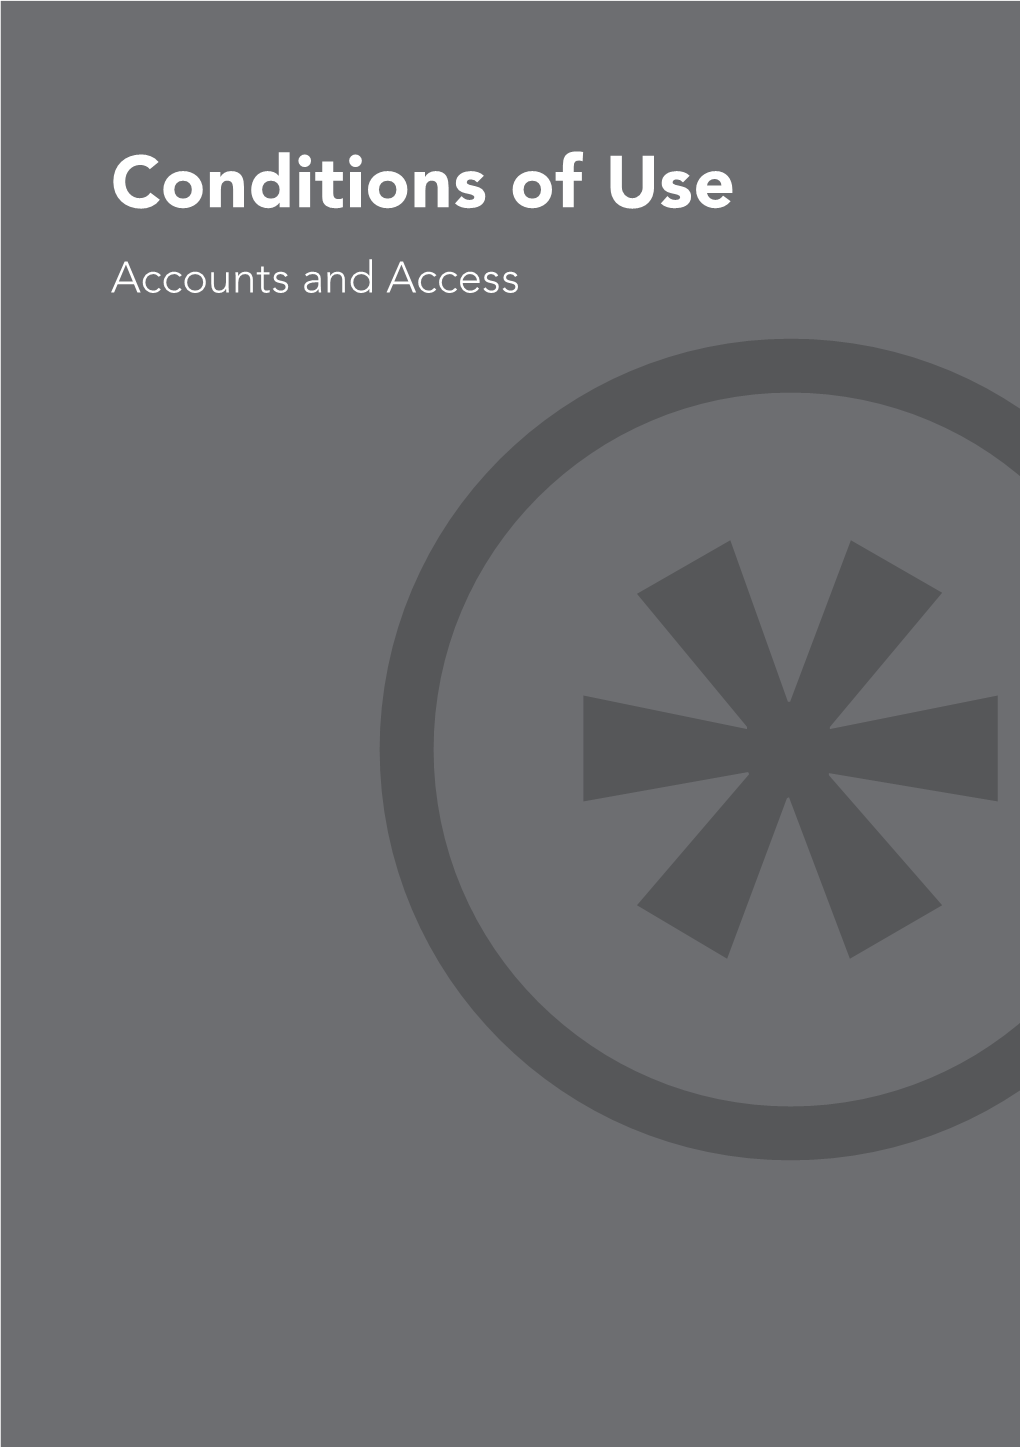 Conditions of Use—Accounts and Access